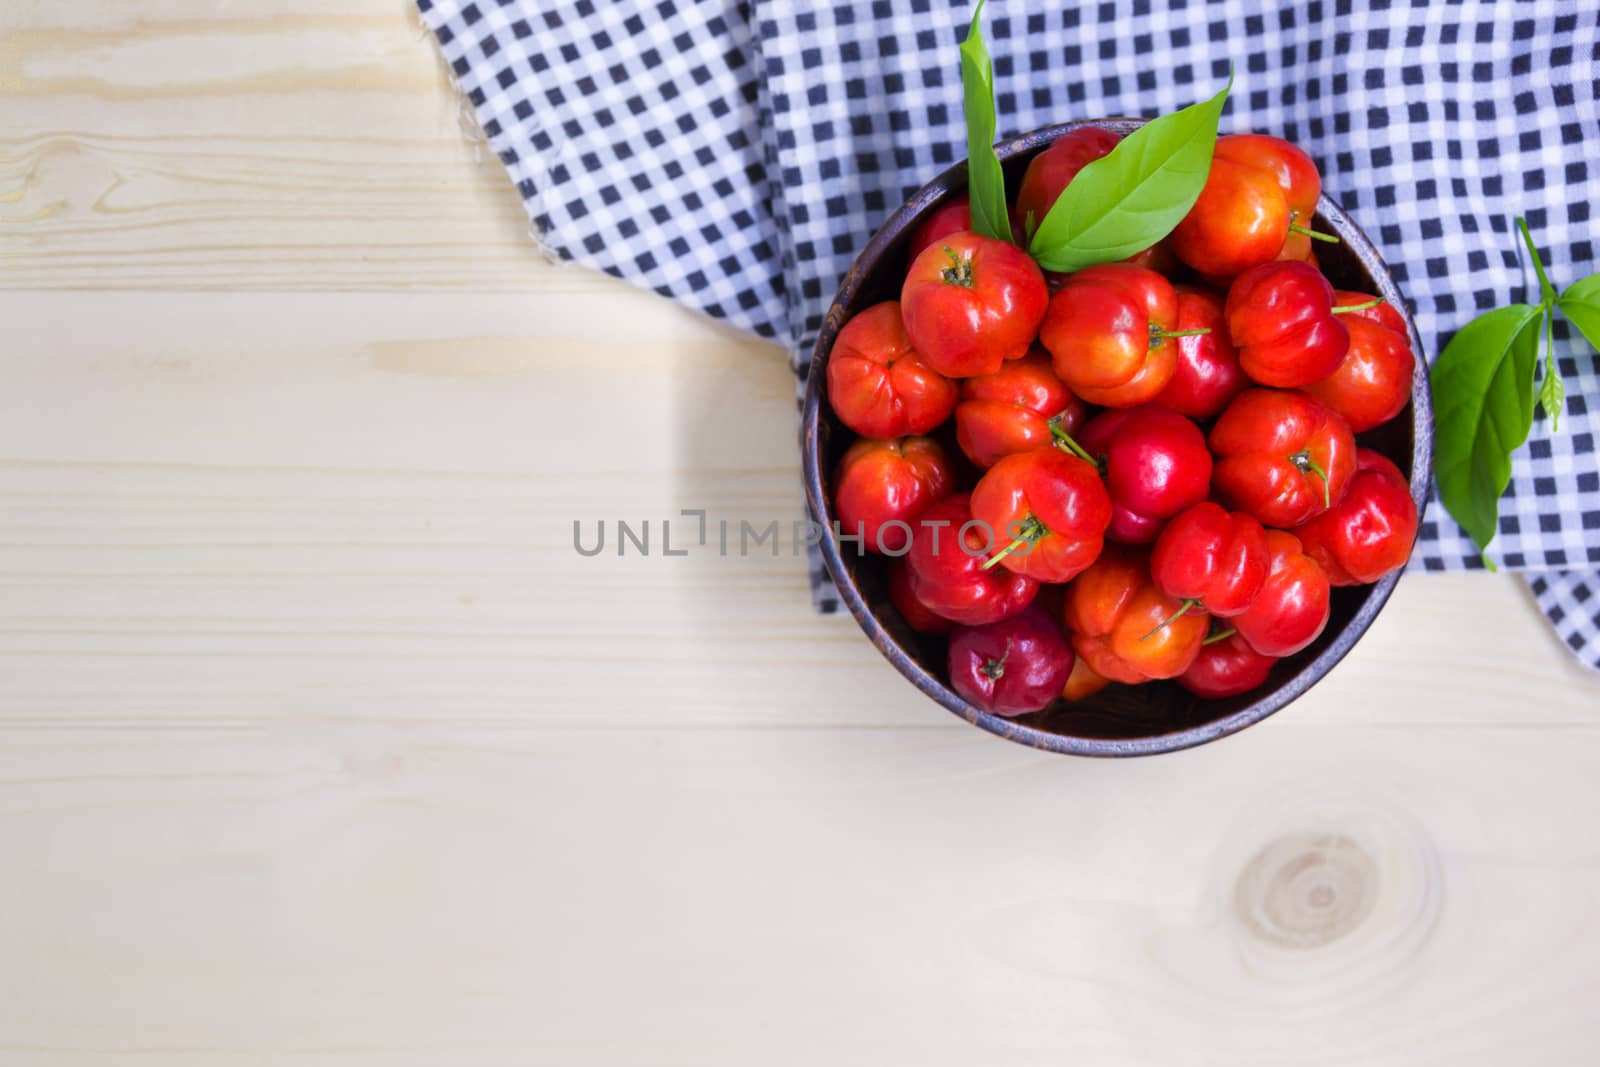 Sweet Cherry Berries In Wooden Bowl With Tartan Fabric On The Table, Red Ripe Juicy Sweet Cherry Lies On Vintage Wooden Background, Flat Lay, Top View And Copyspace For Text, Healthy Fruit Food. by rakoptonLPN